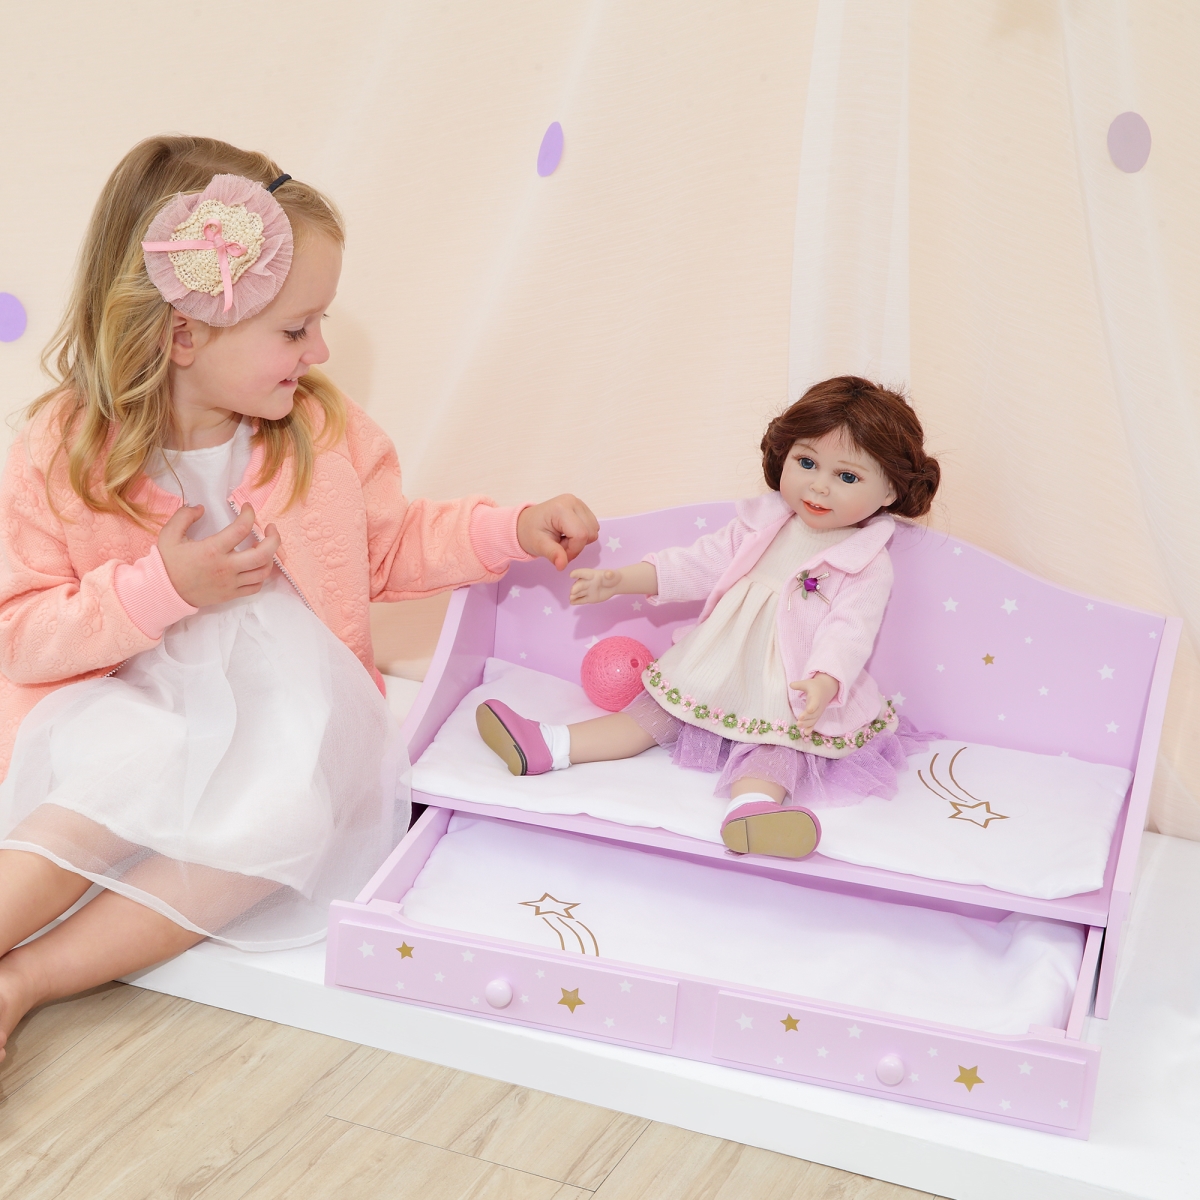 Td-0096ap 18 In. Twinkle Stars Princess Doll Trundle Bed, Purple & Gold